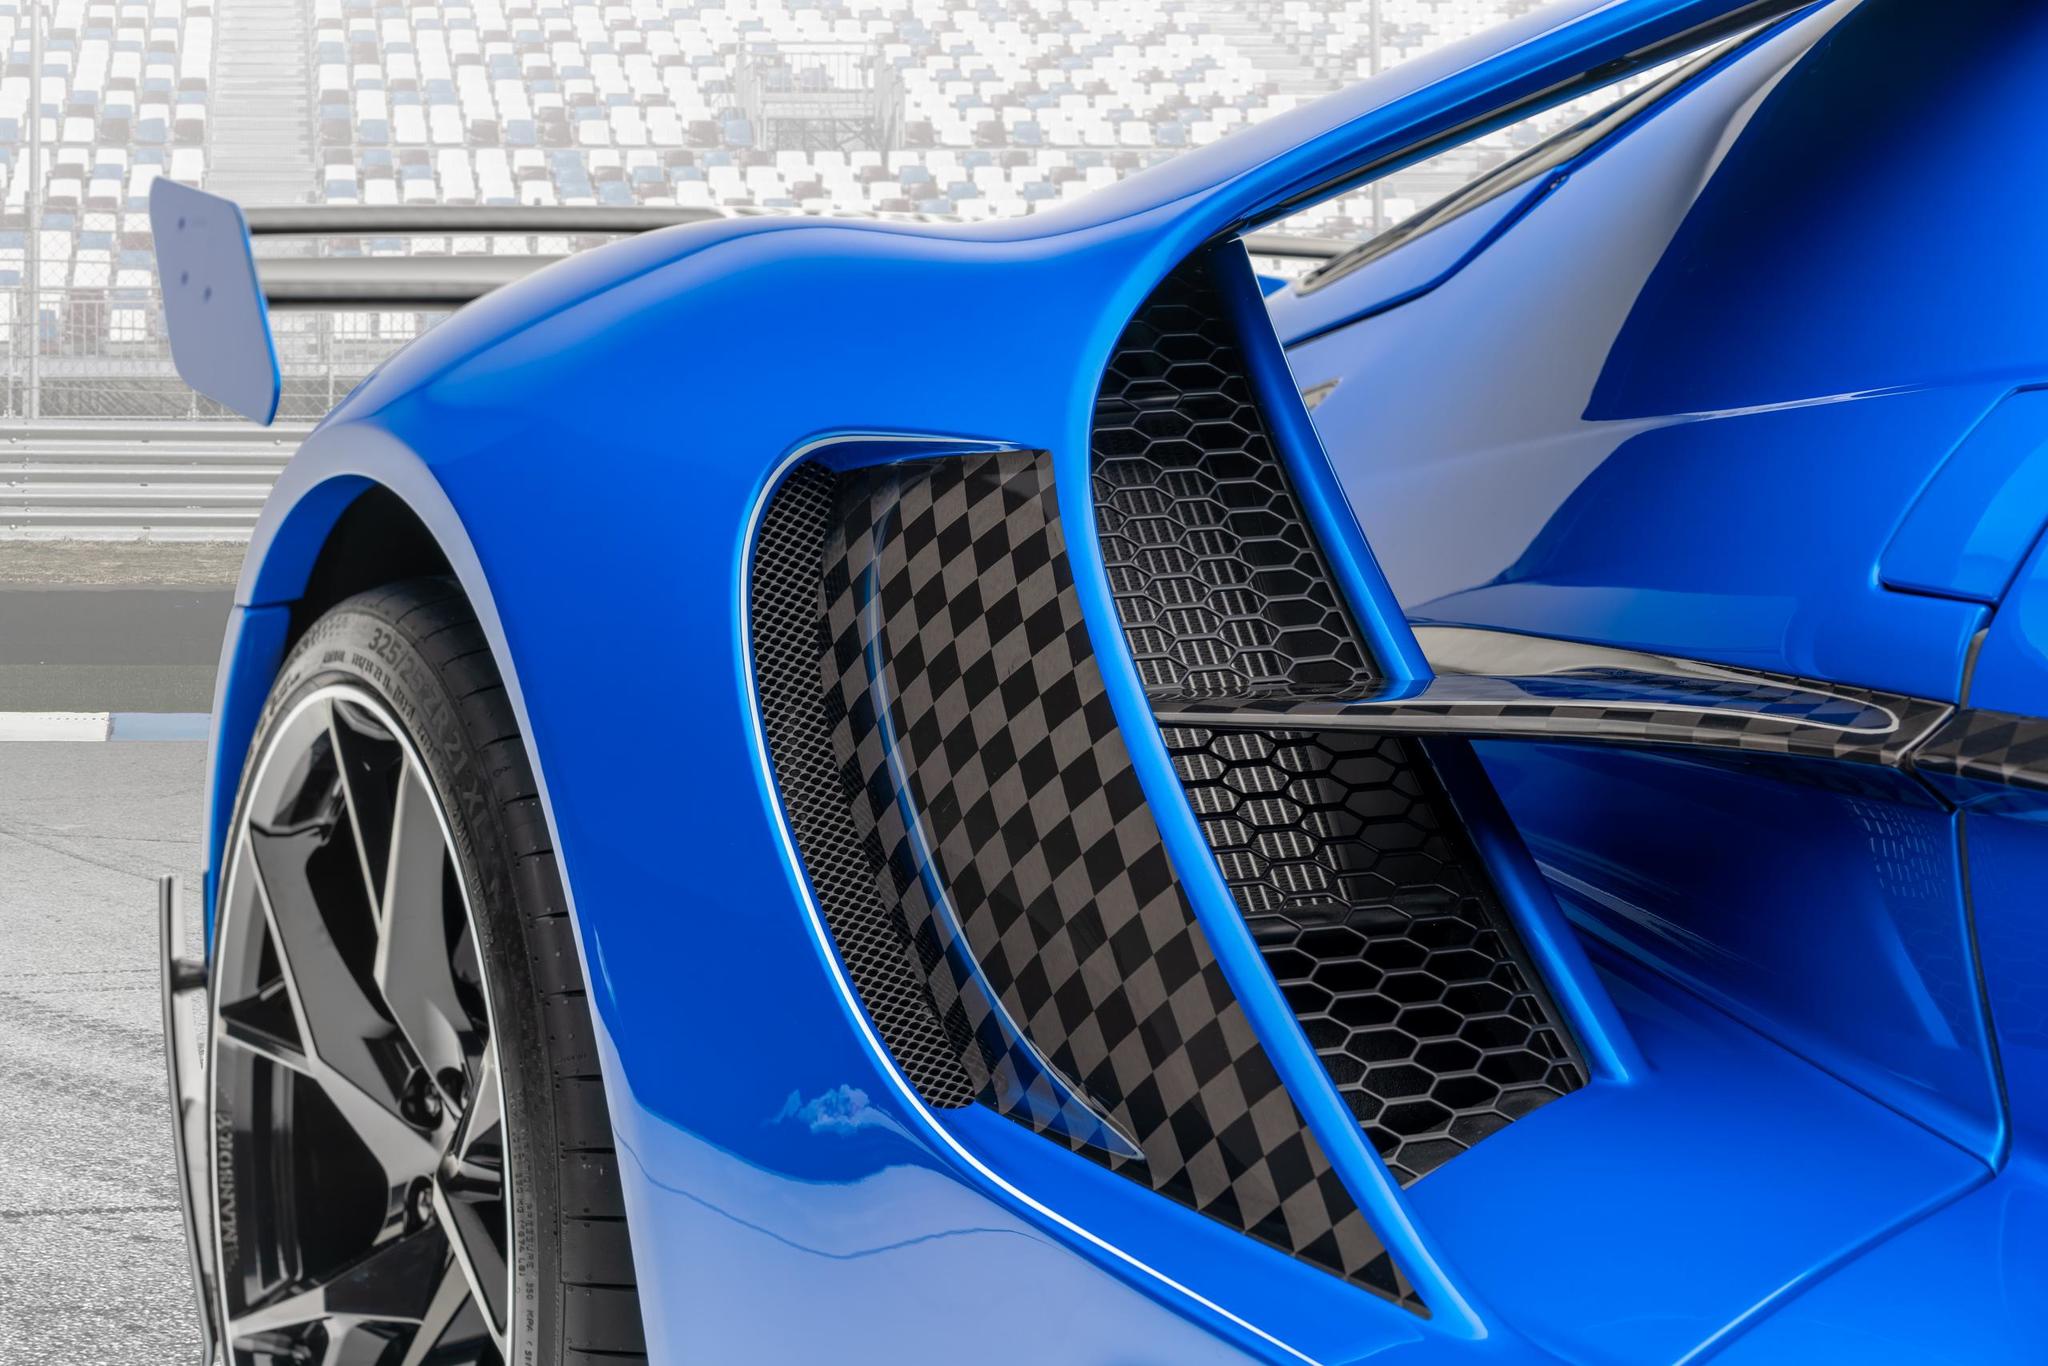 Mansory body kit for Ford GT carbon